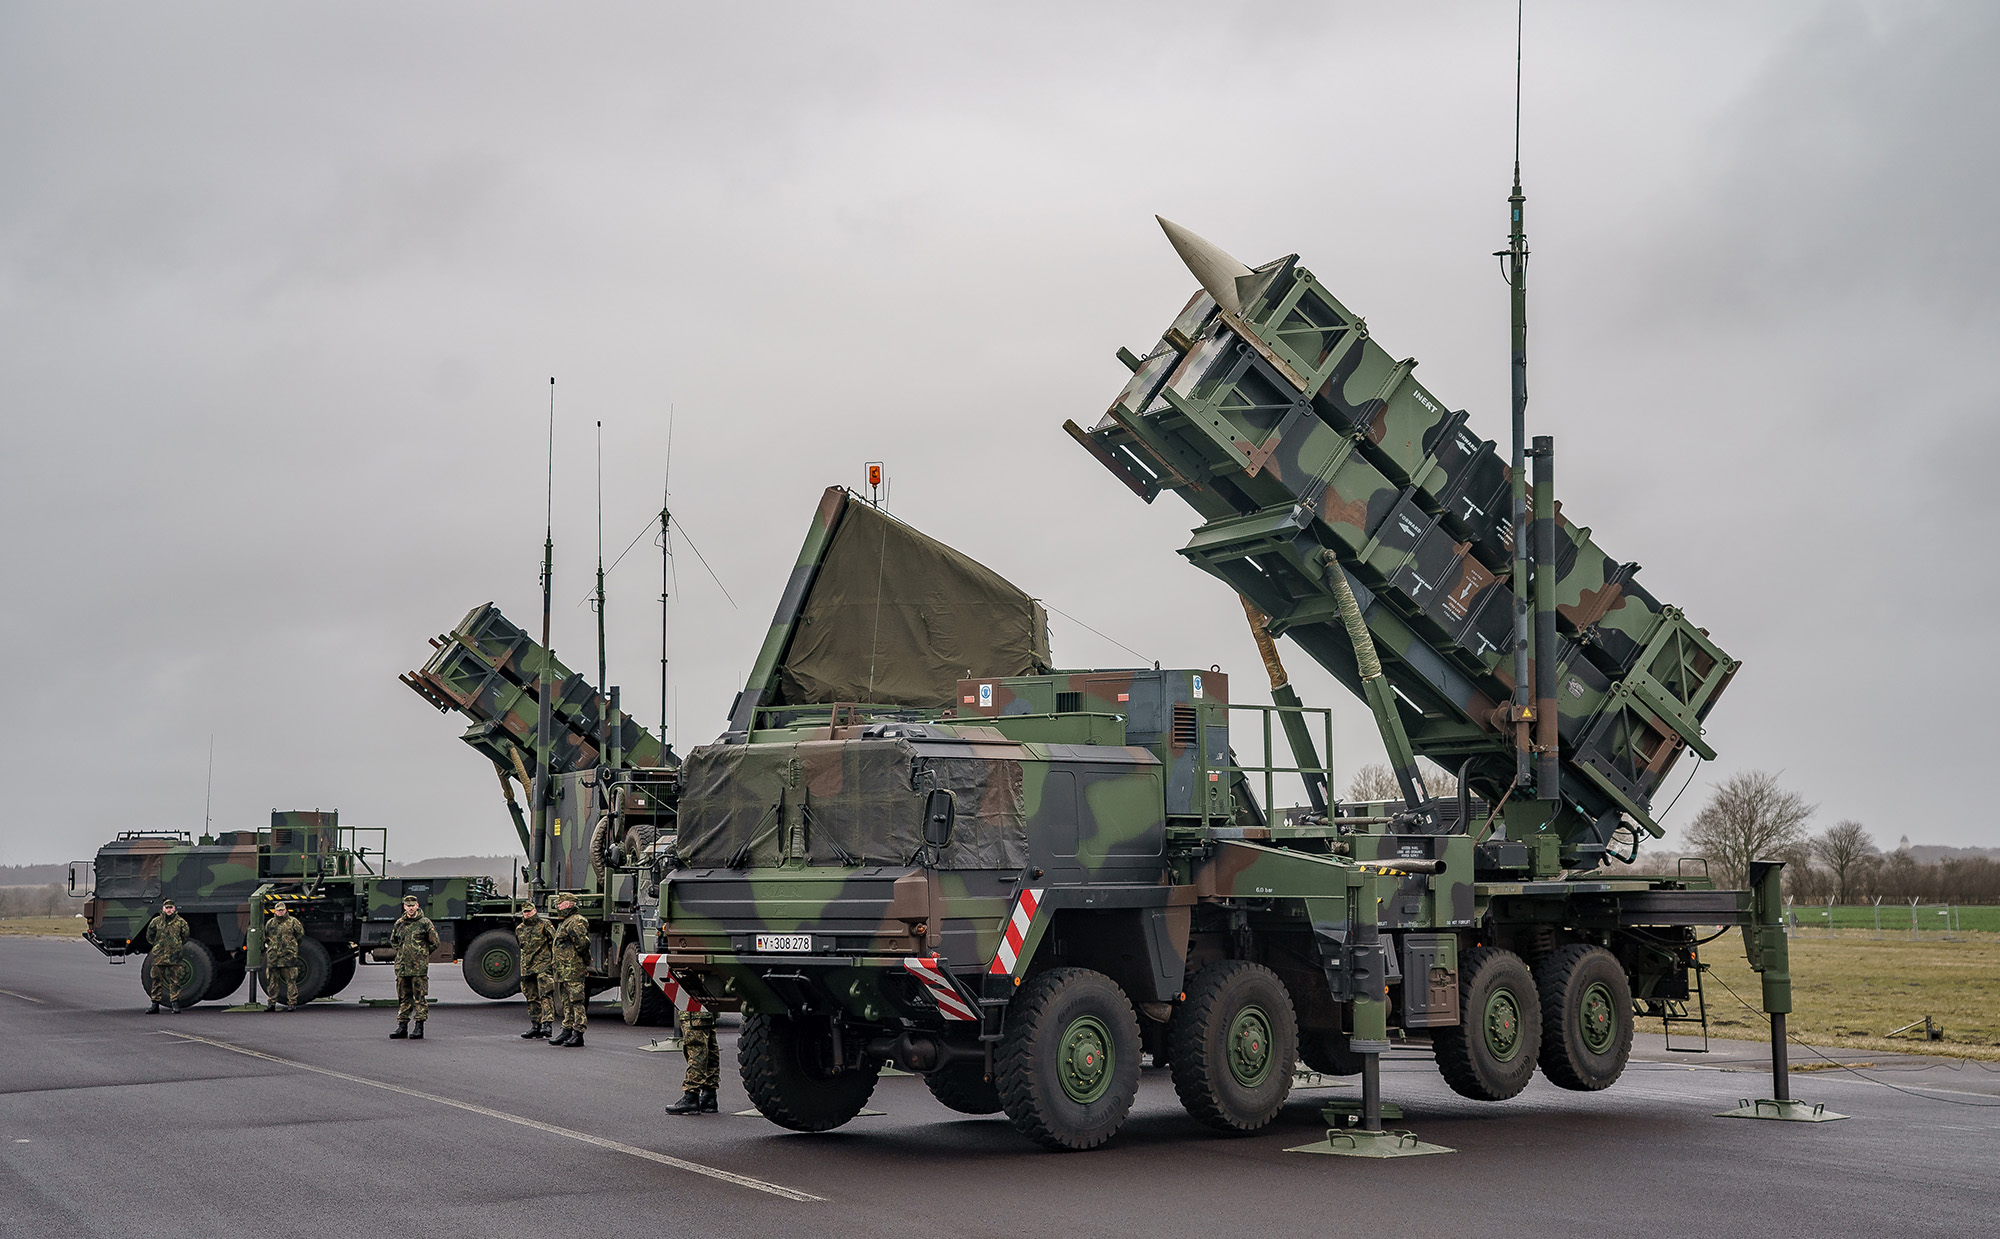 Patriot anti-aircraft missile systems of the 1st anti-aircraft missile squadron of the Bundeswehr stand at the airfield of the Schwesing military airport, Germany, on March 17.